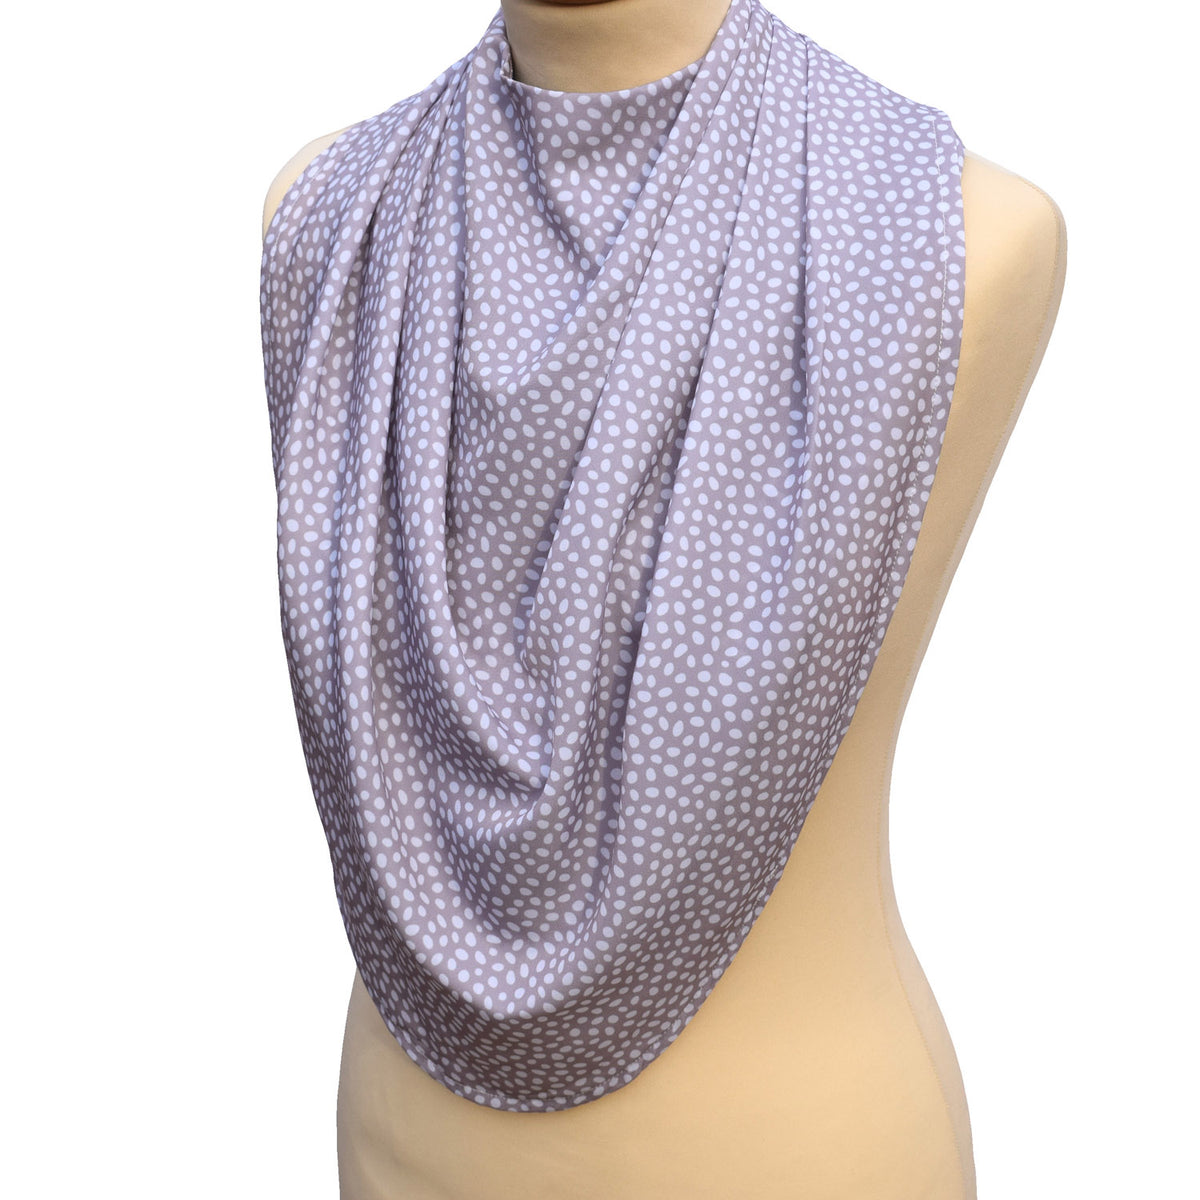 Pashmina Style Clothes Protector - Dotted Grey